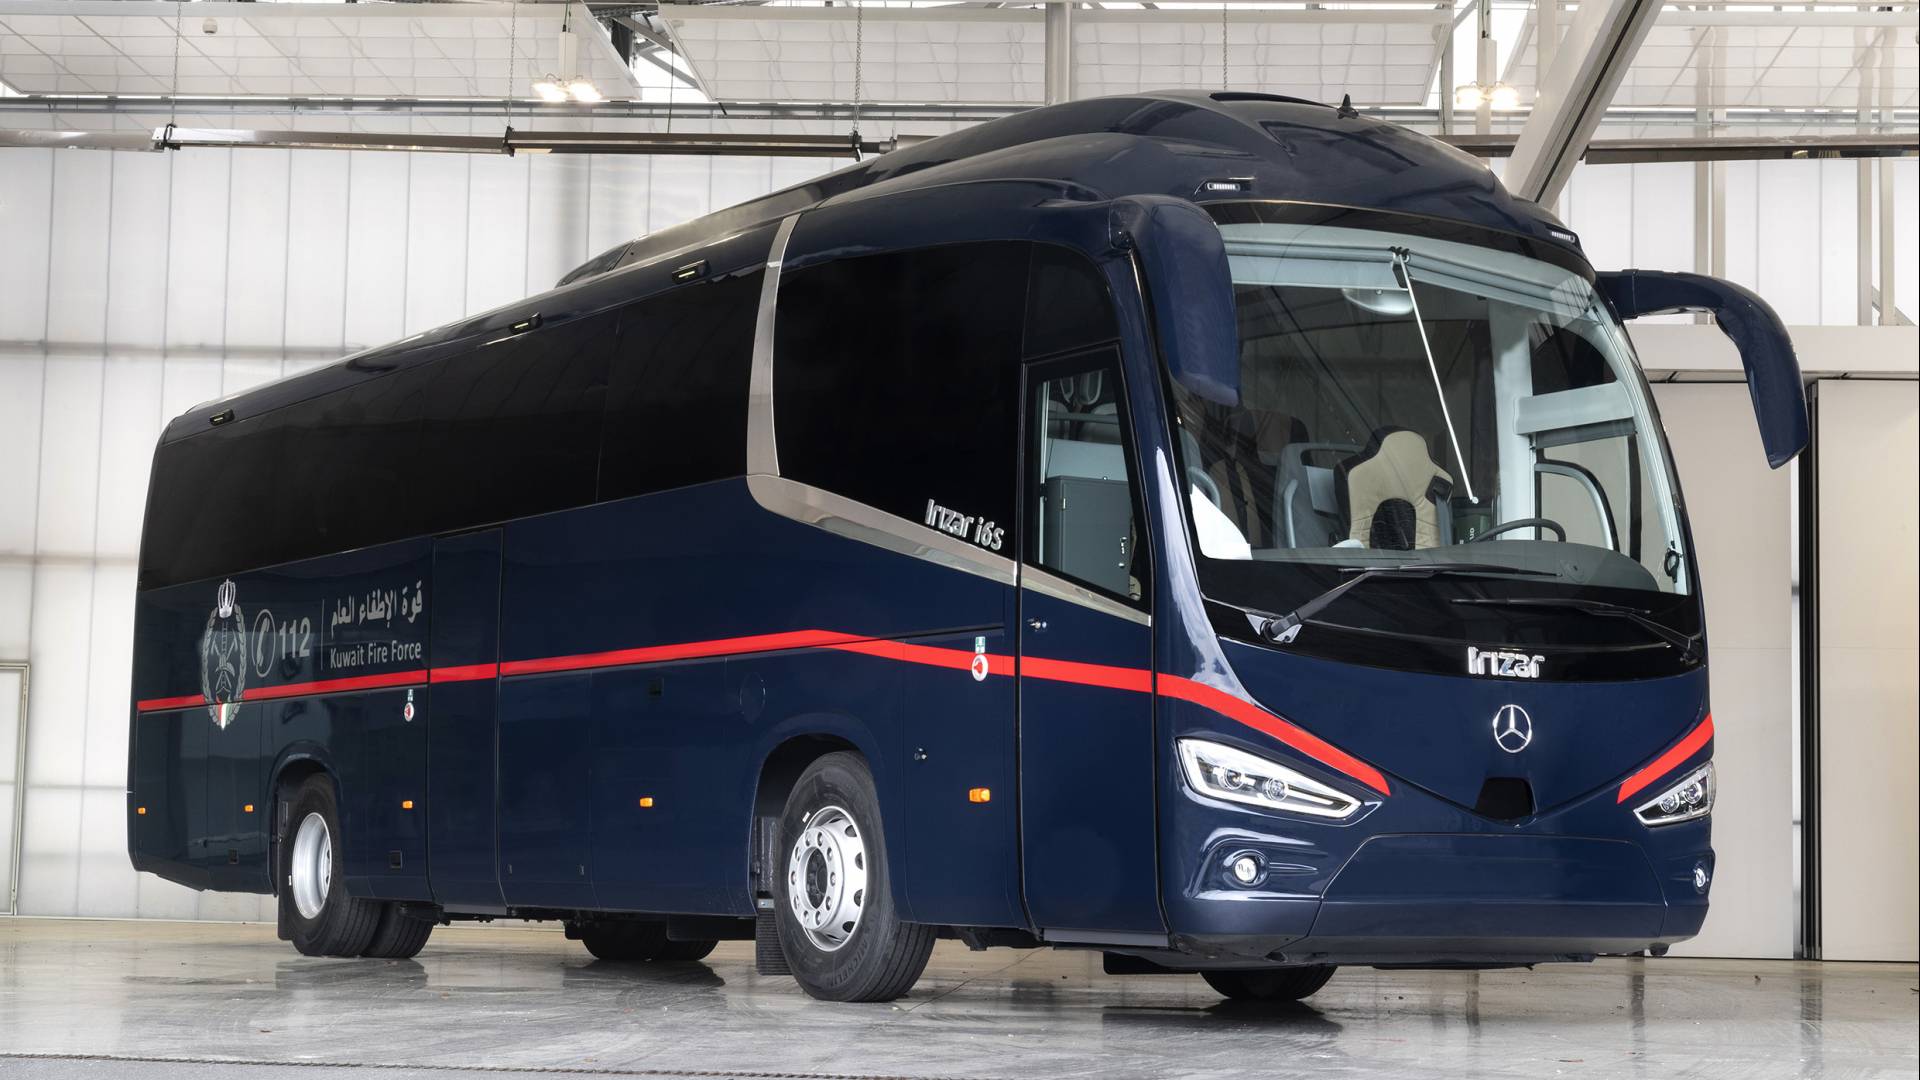 An Irizar i6S Premium for the Kuwait Fire Force